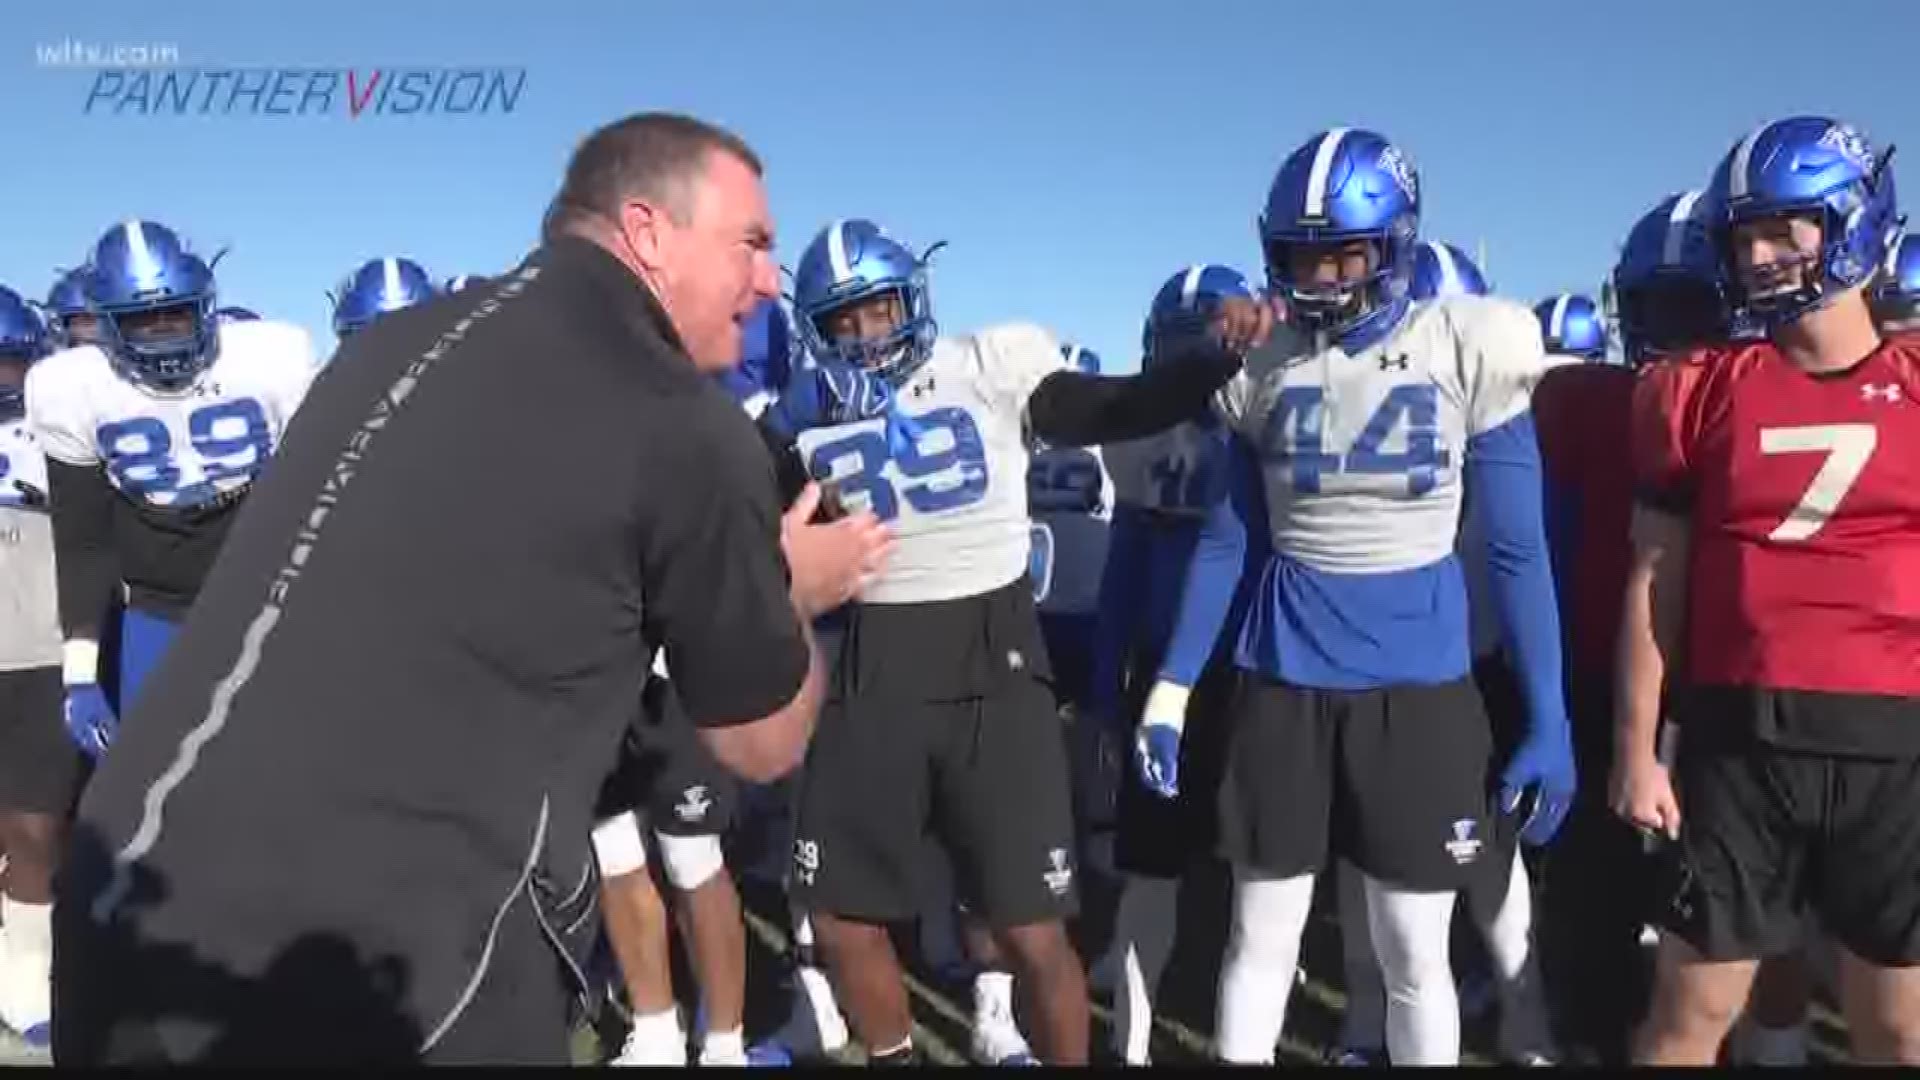 Former USC assistant coach Shawn Elliott has led Georgia State to a bowl game in his first season as head coach.